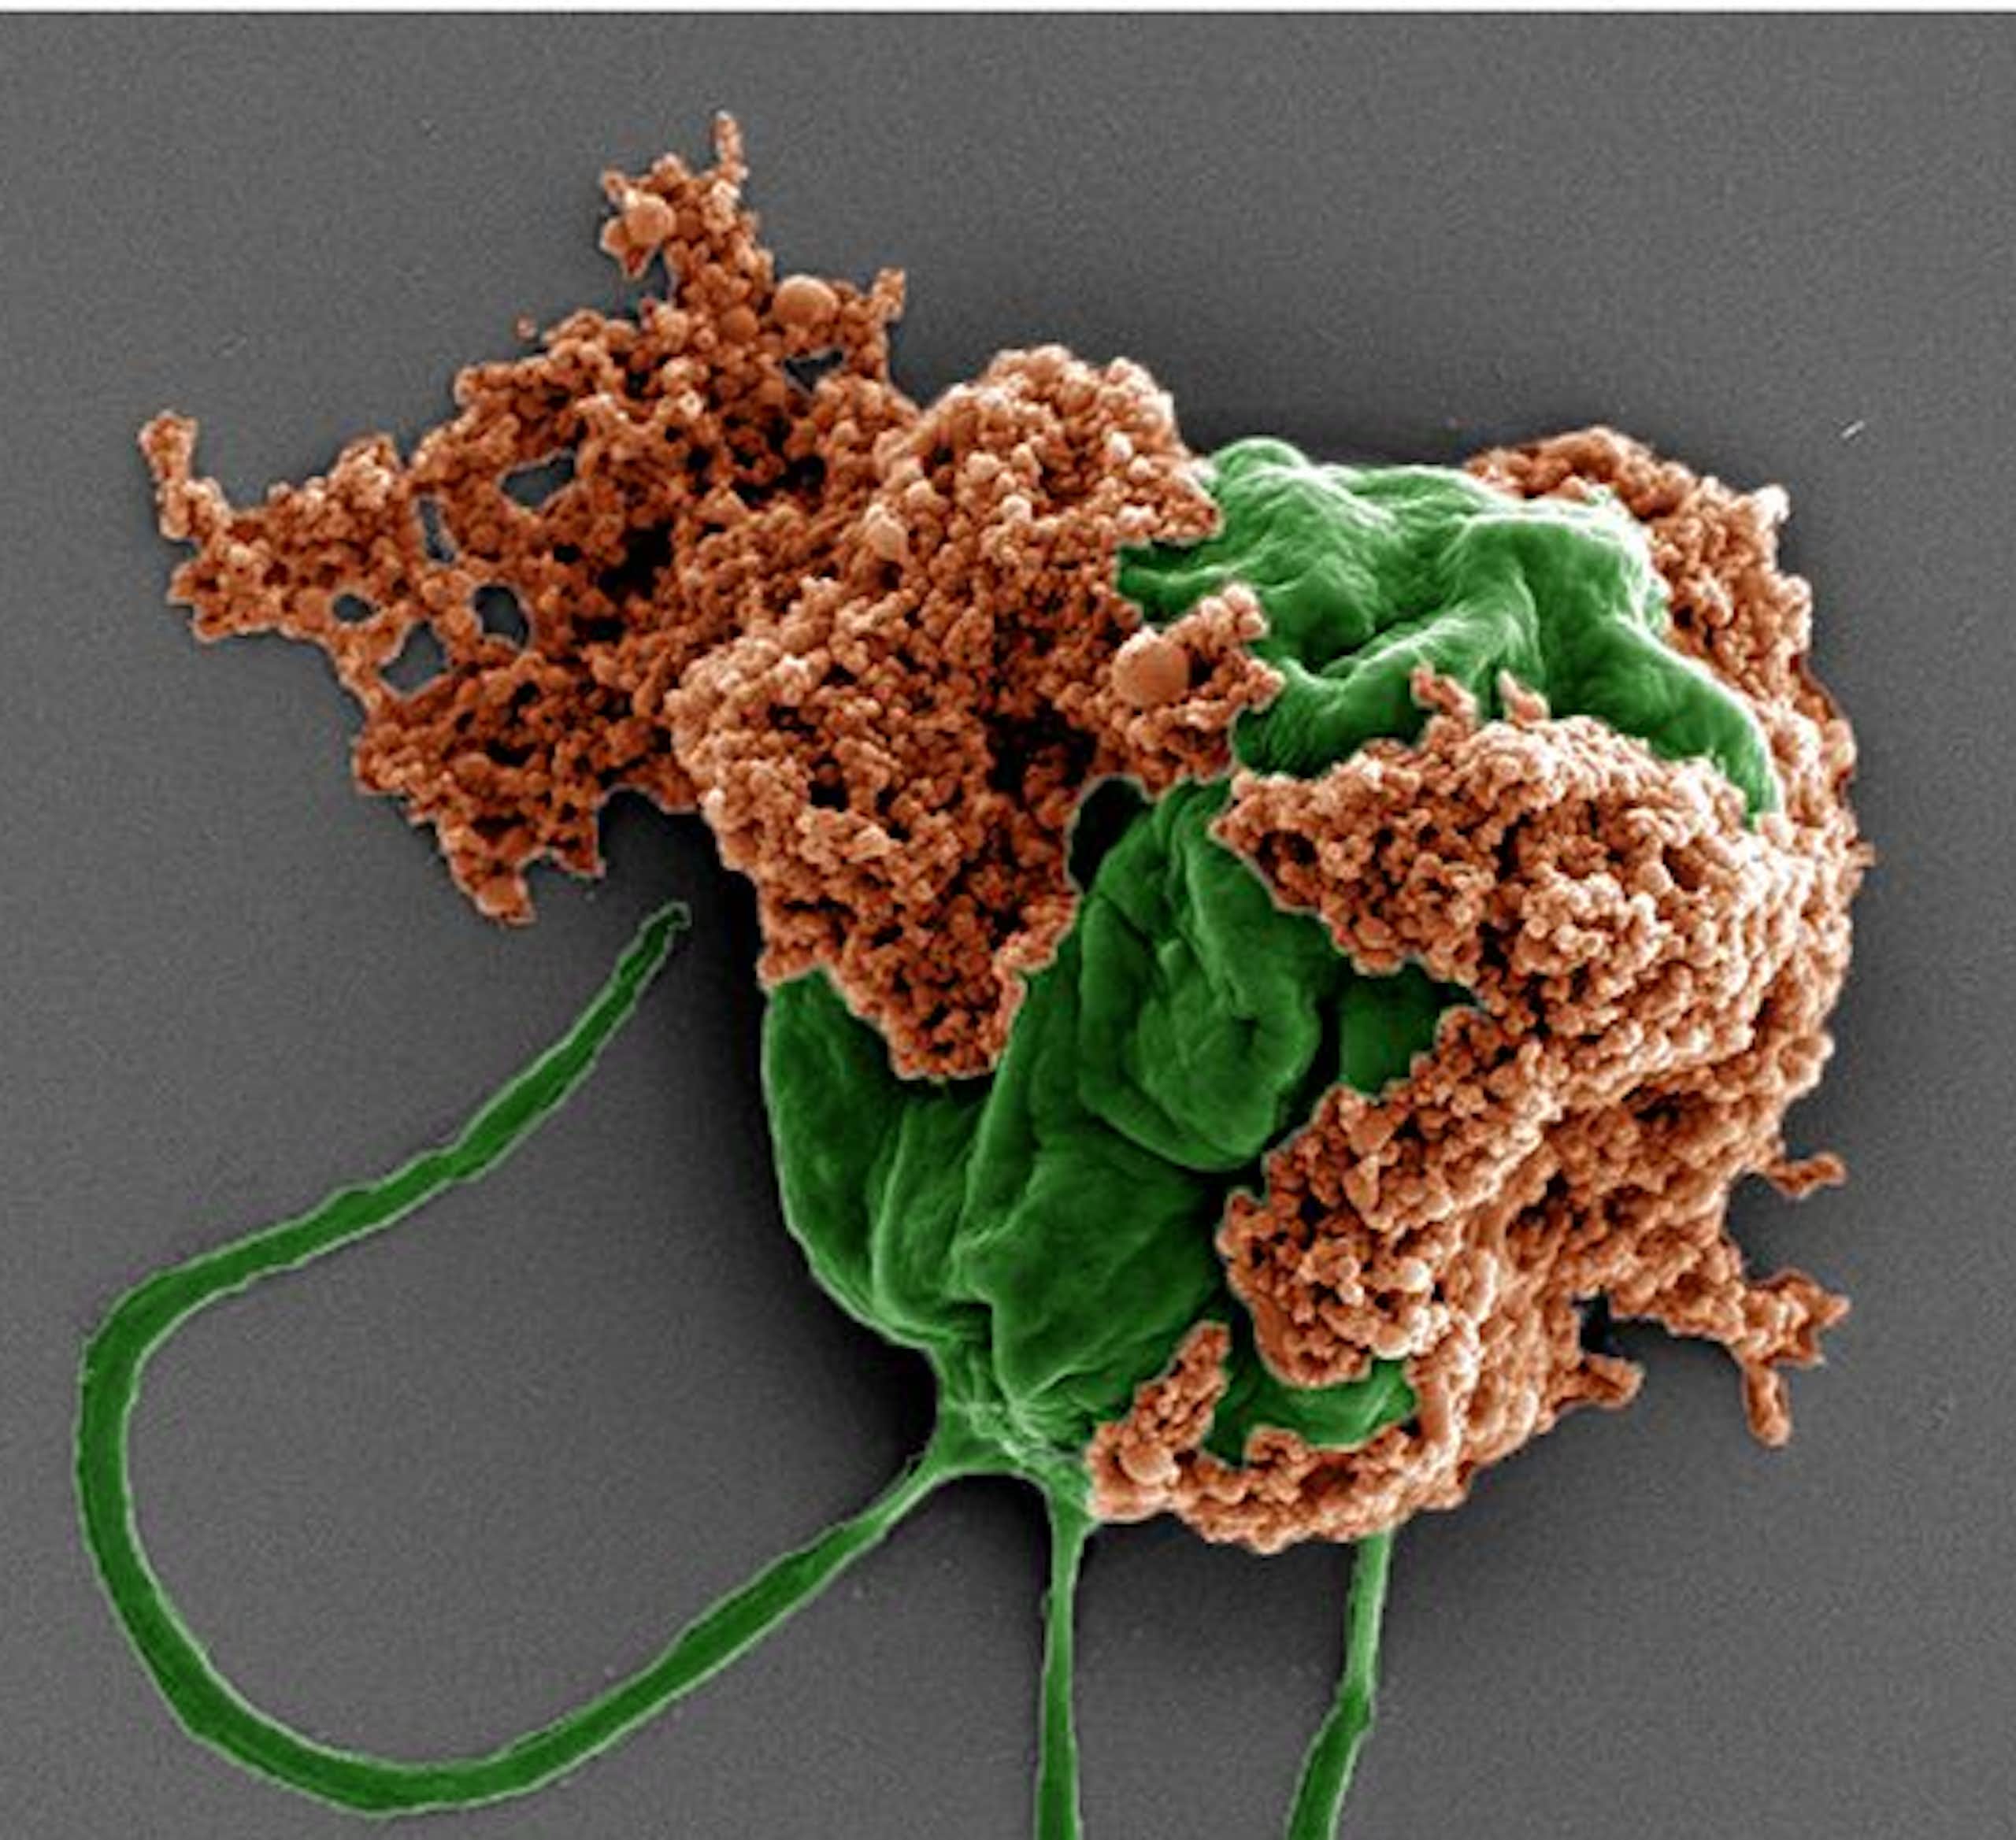 Microscopy image of green spherical organism with two hair-like extensions and clumps of rust-colored membranes on its surface